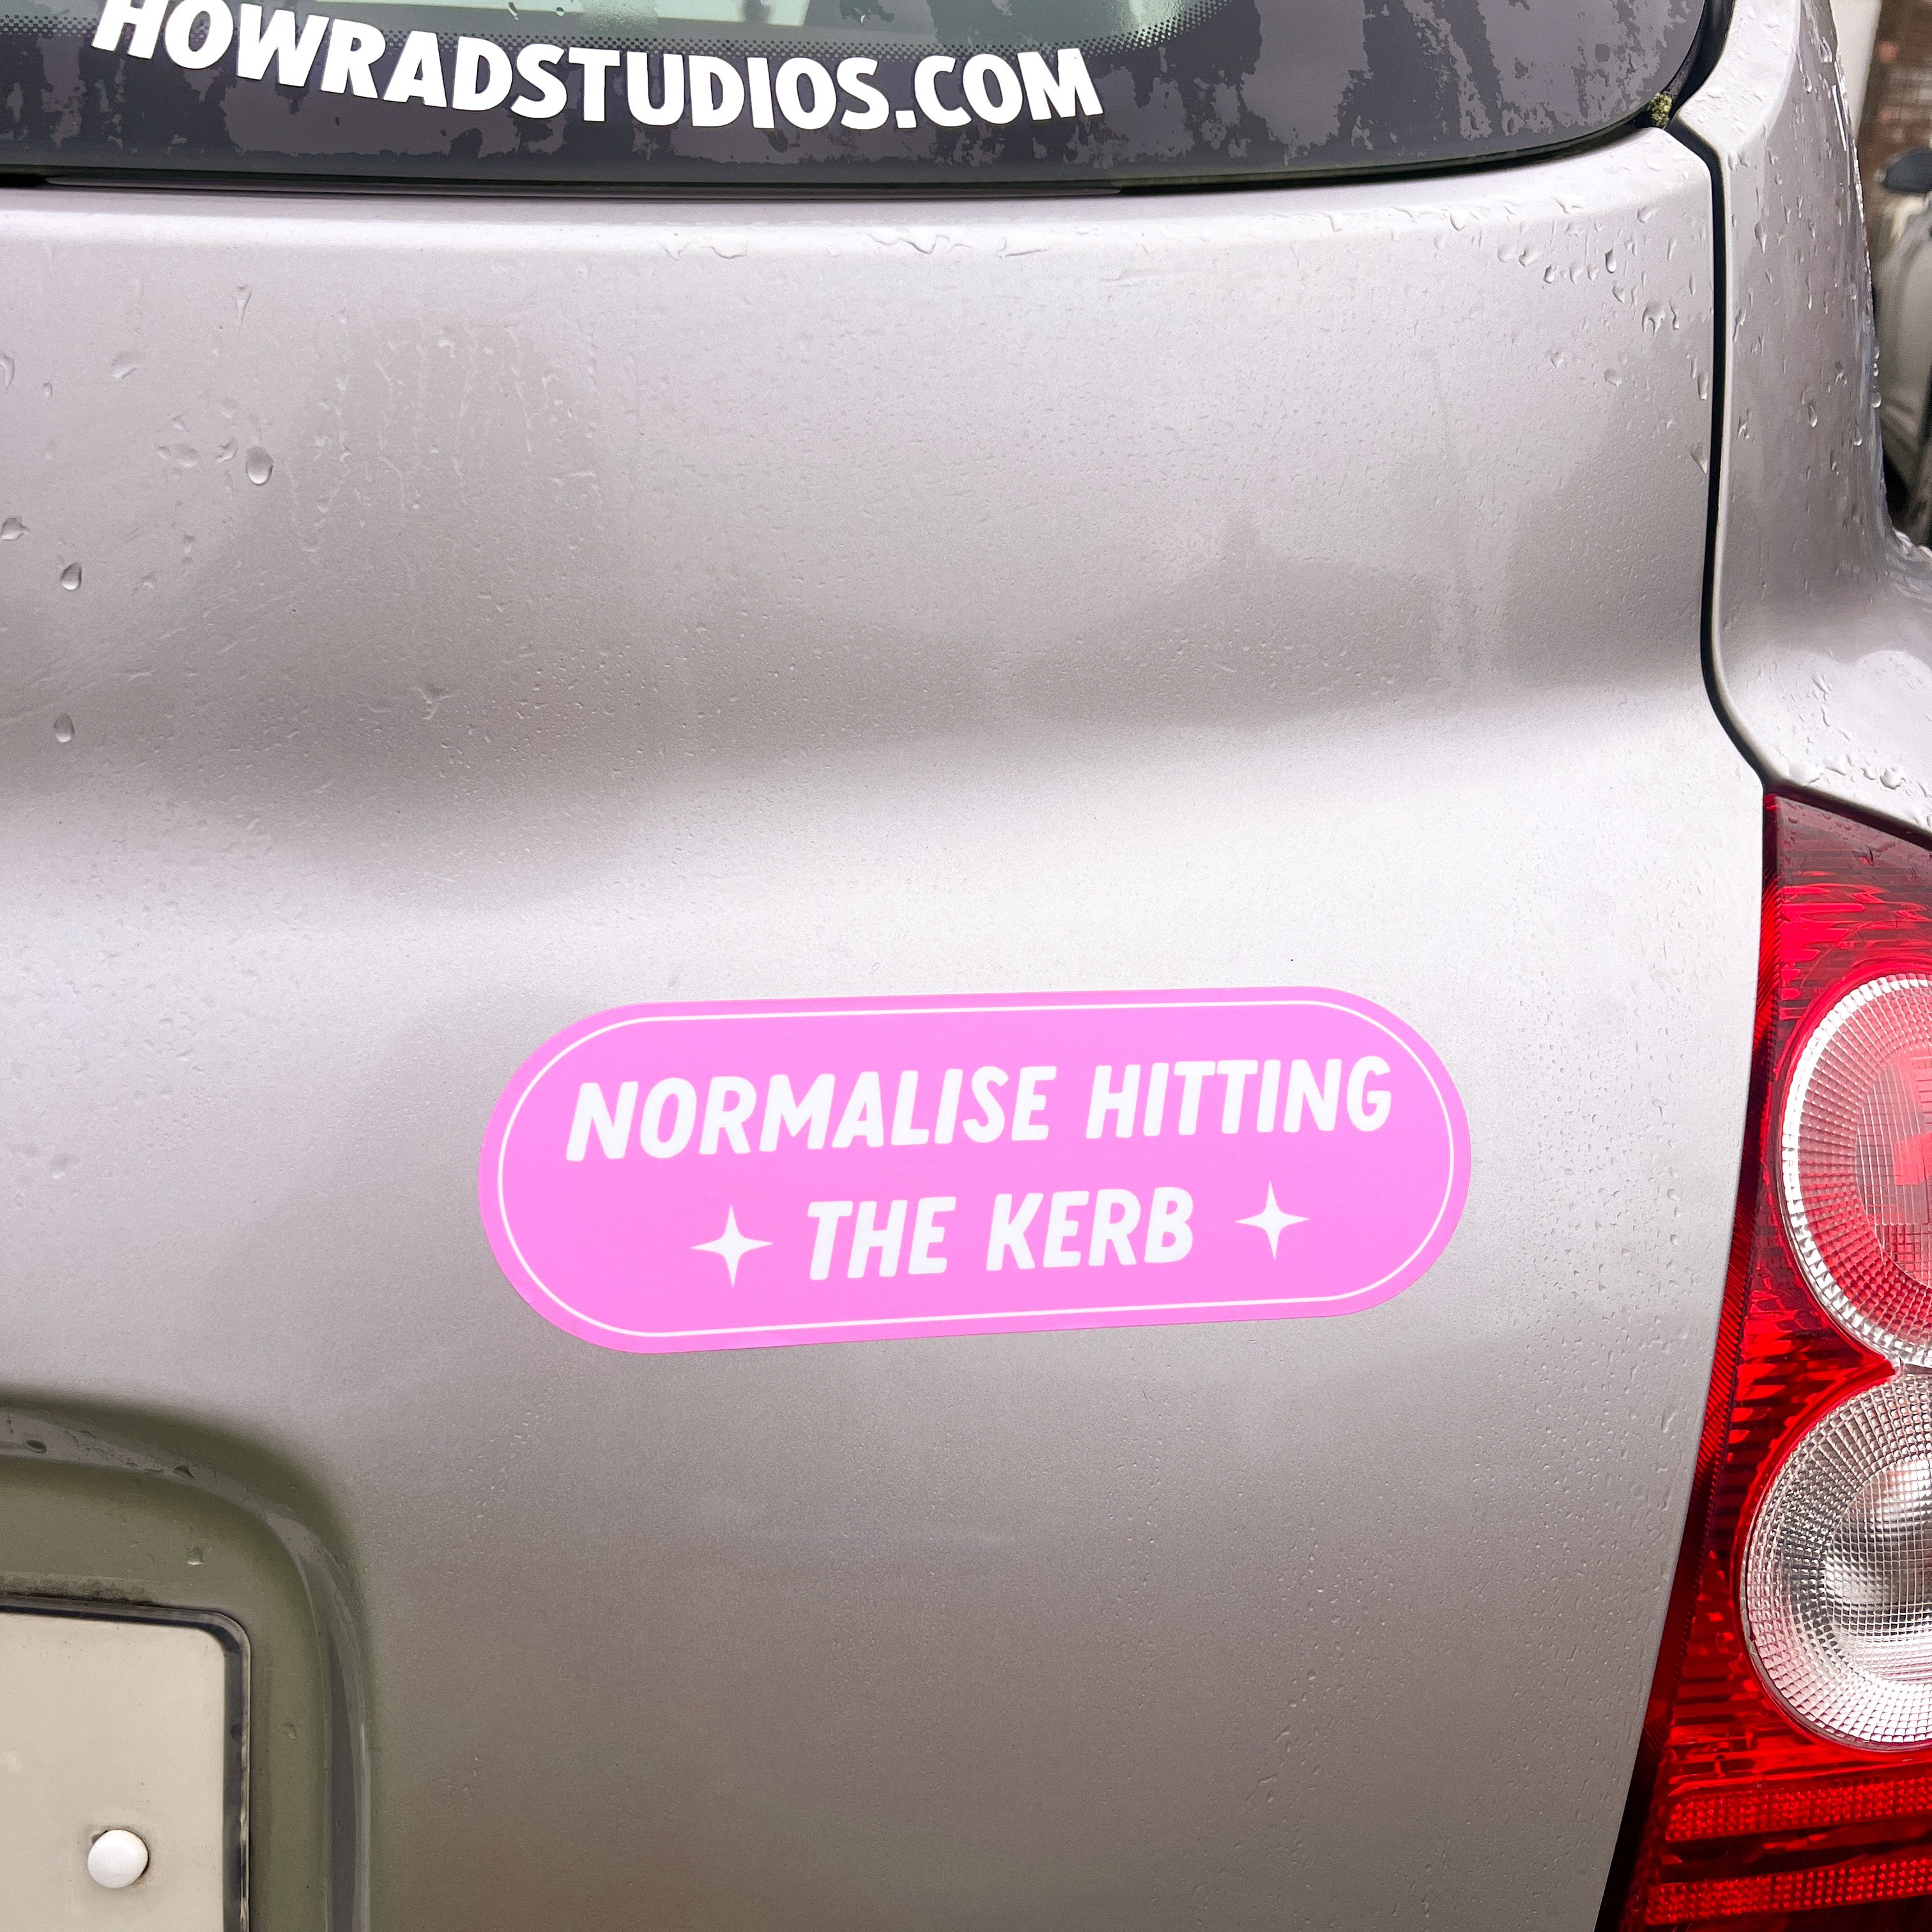 Normalise hitting the kerb bumper sticker